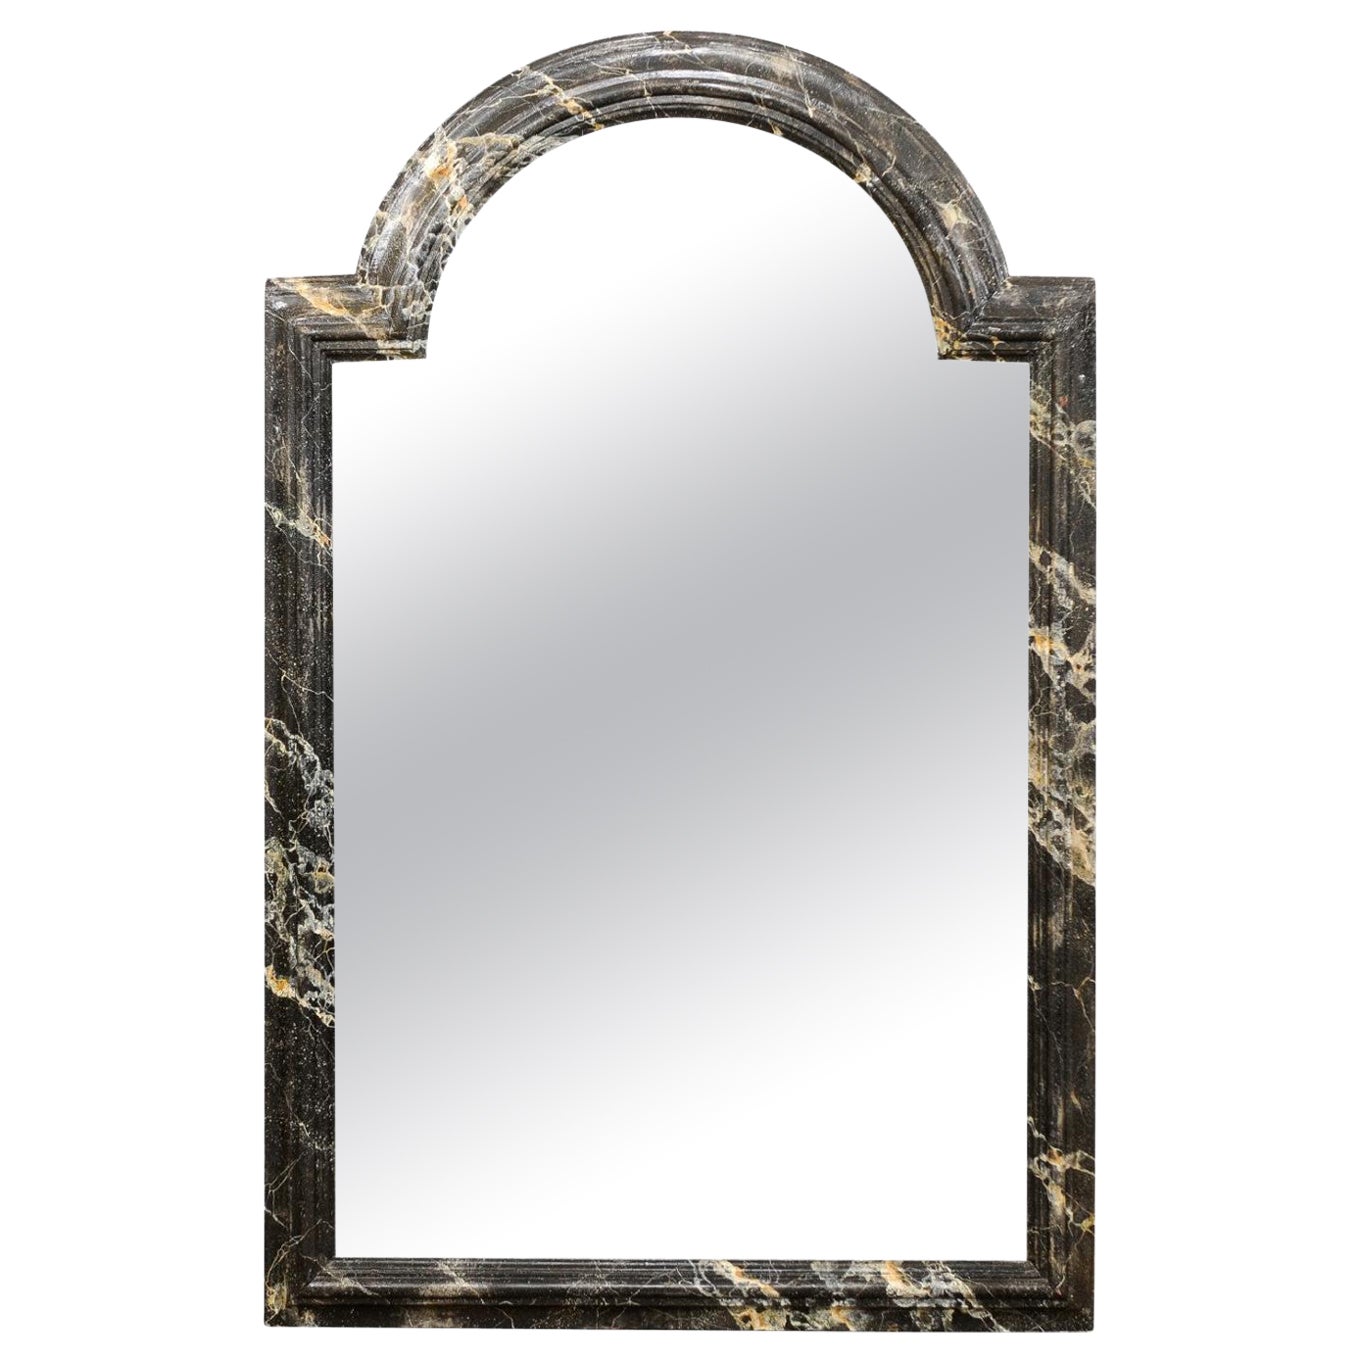 18th C. French Arch Crested Mirror w/Faux-Marbled Wood Surround For Sale